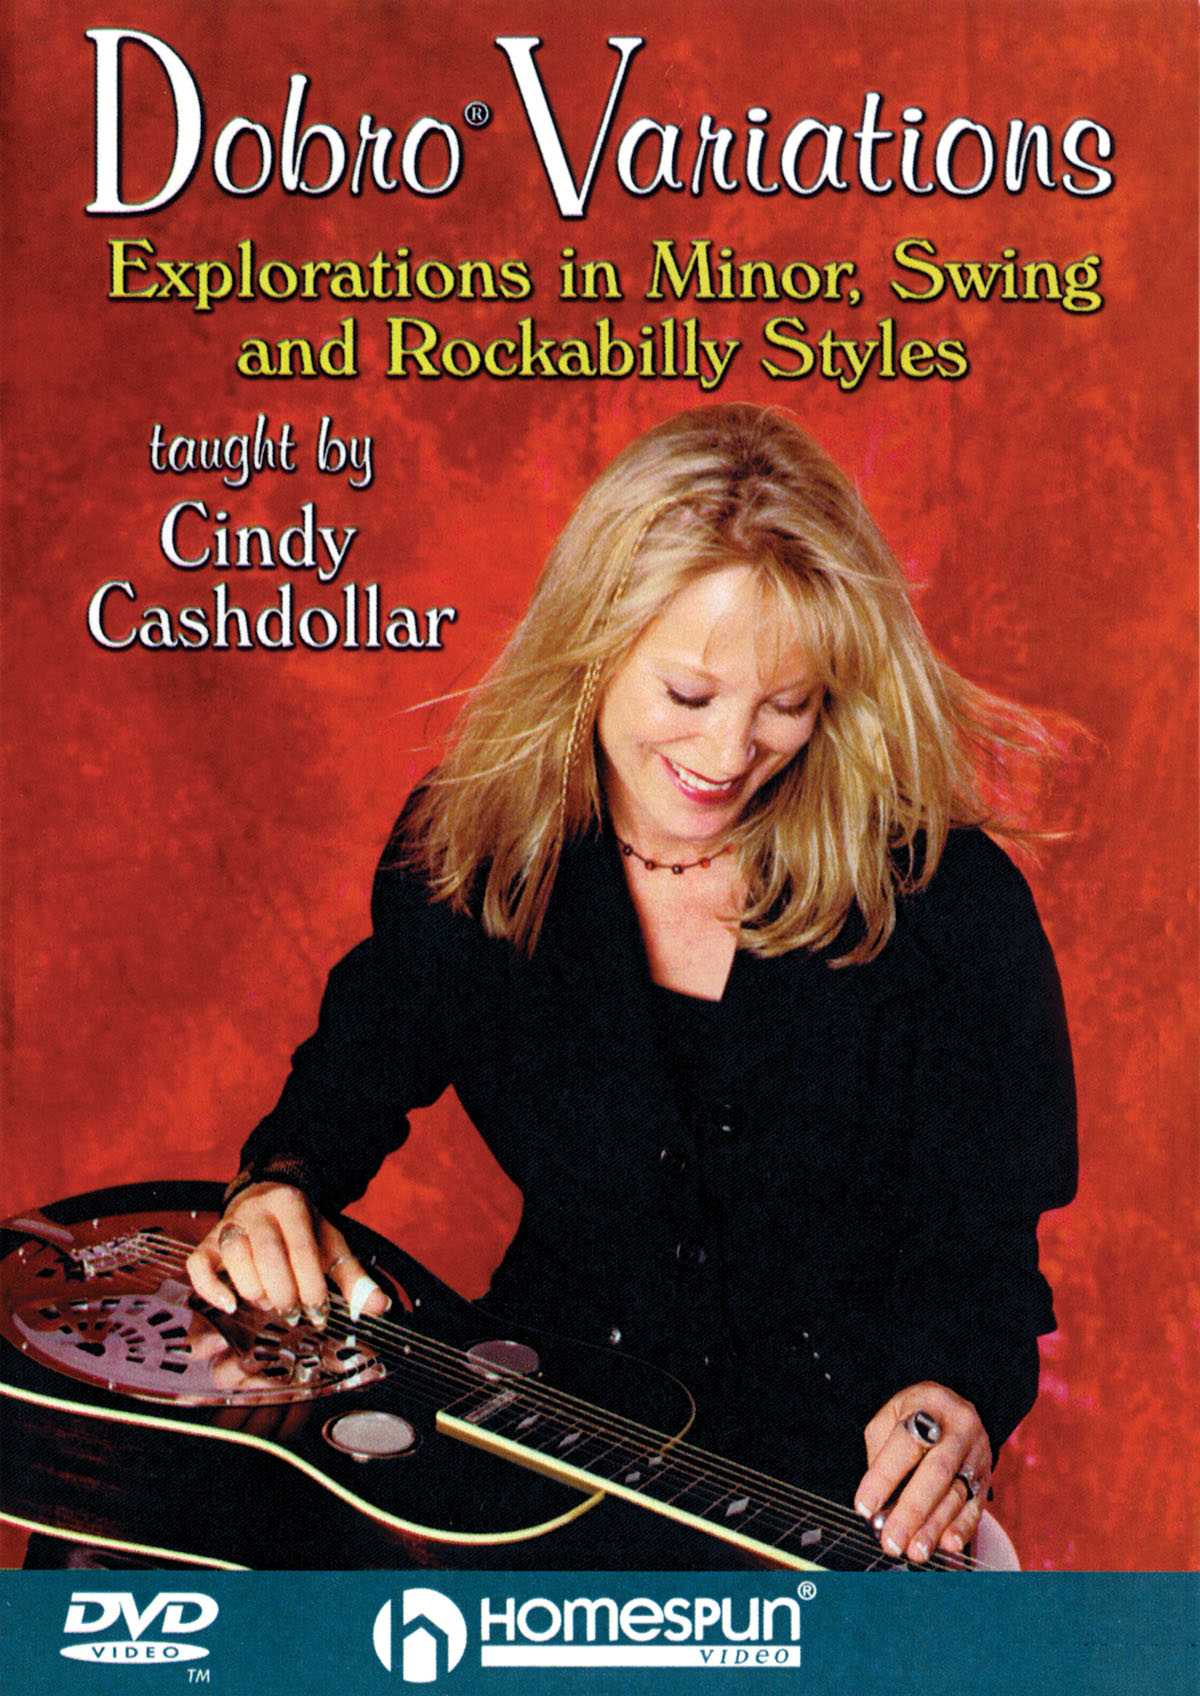 Image 3 of DVD - Dobro Variations - Explorations in Minor, Swing, and Rockabilly Styles - SKU# 300-DVD74 : Product Type Media : Elderly Instruments